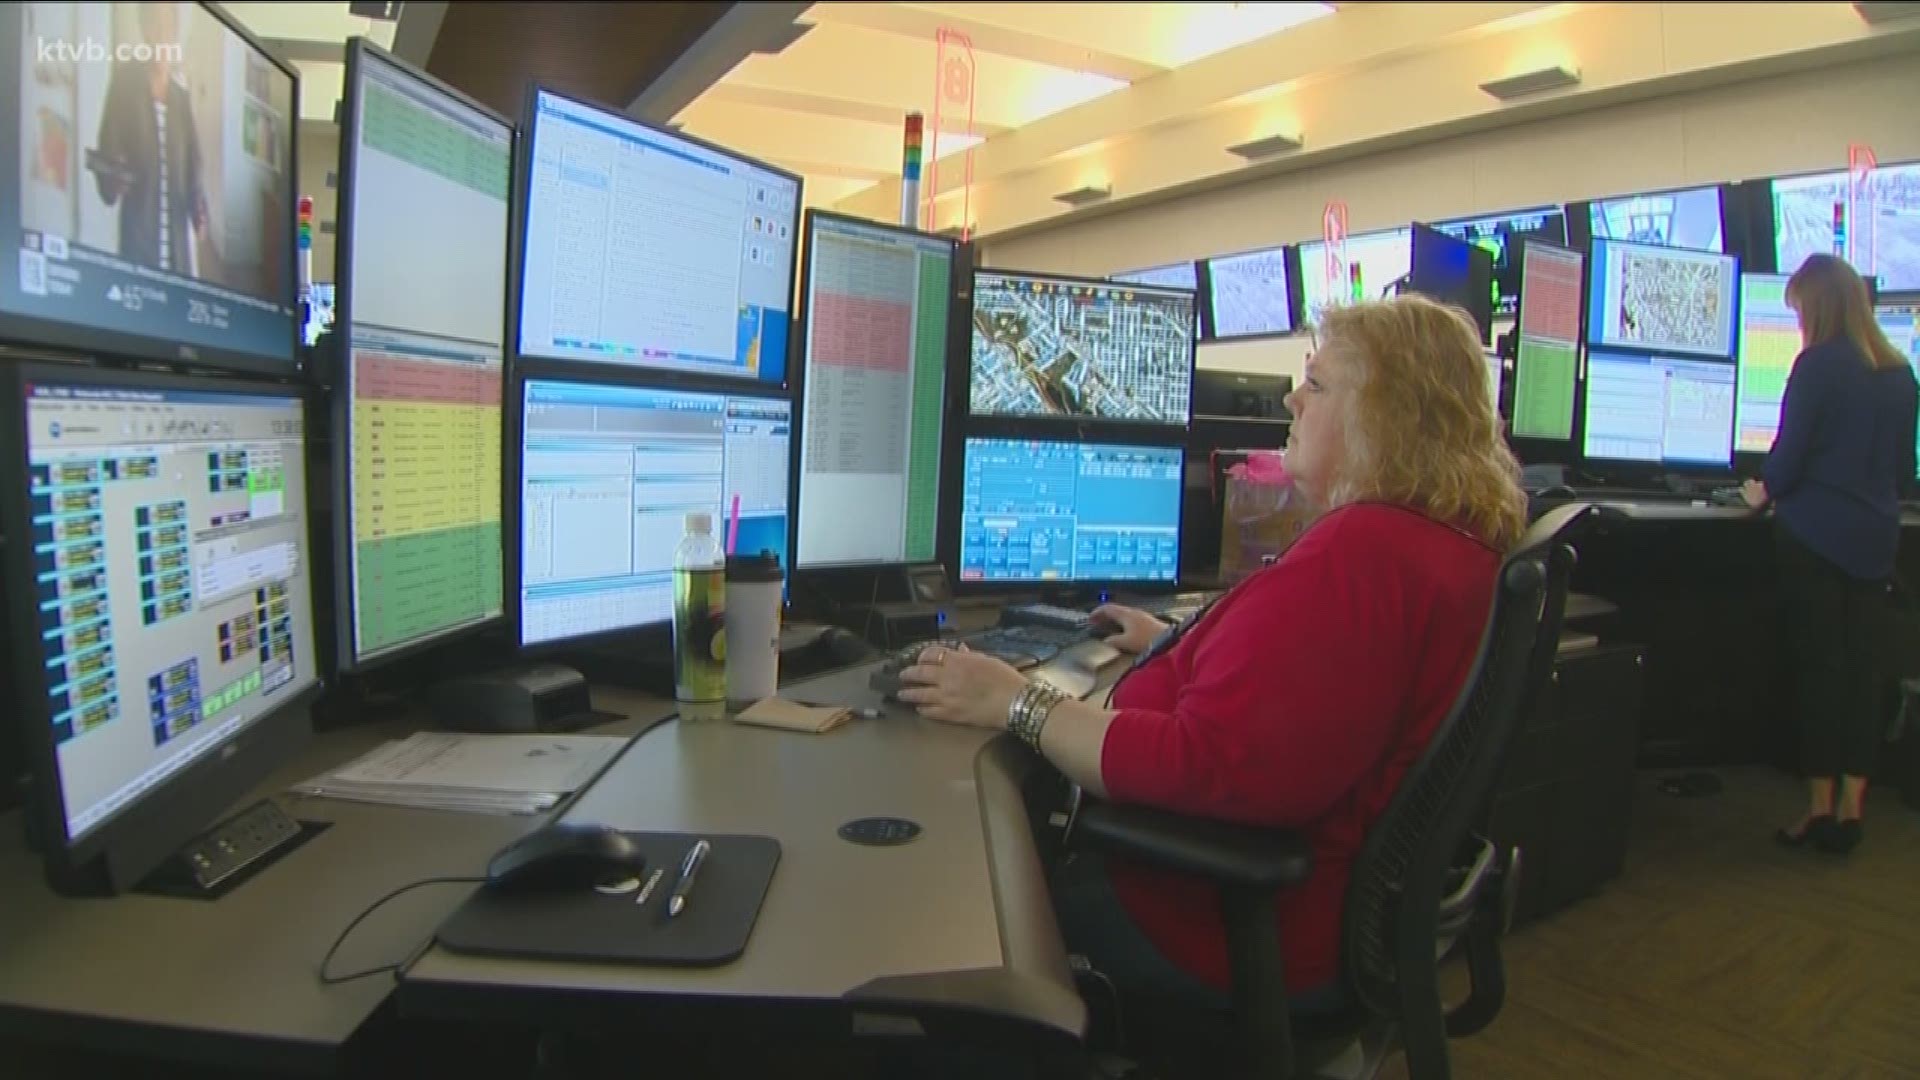 We learned about the day-to-day operations and what dispatchers go through on a daily basis.